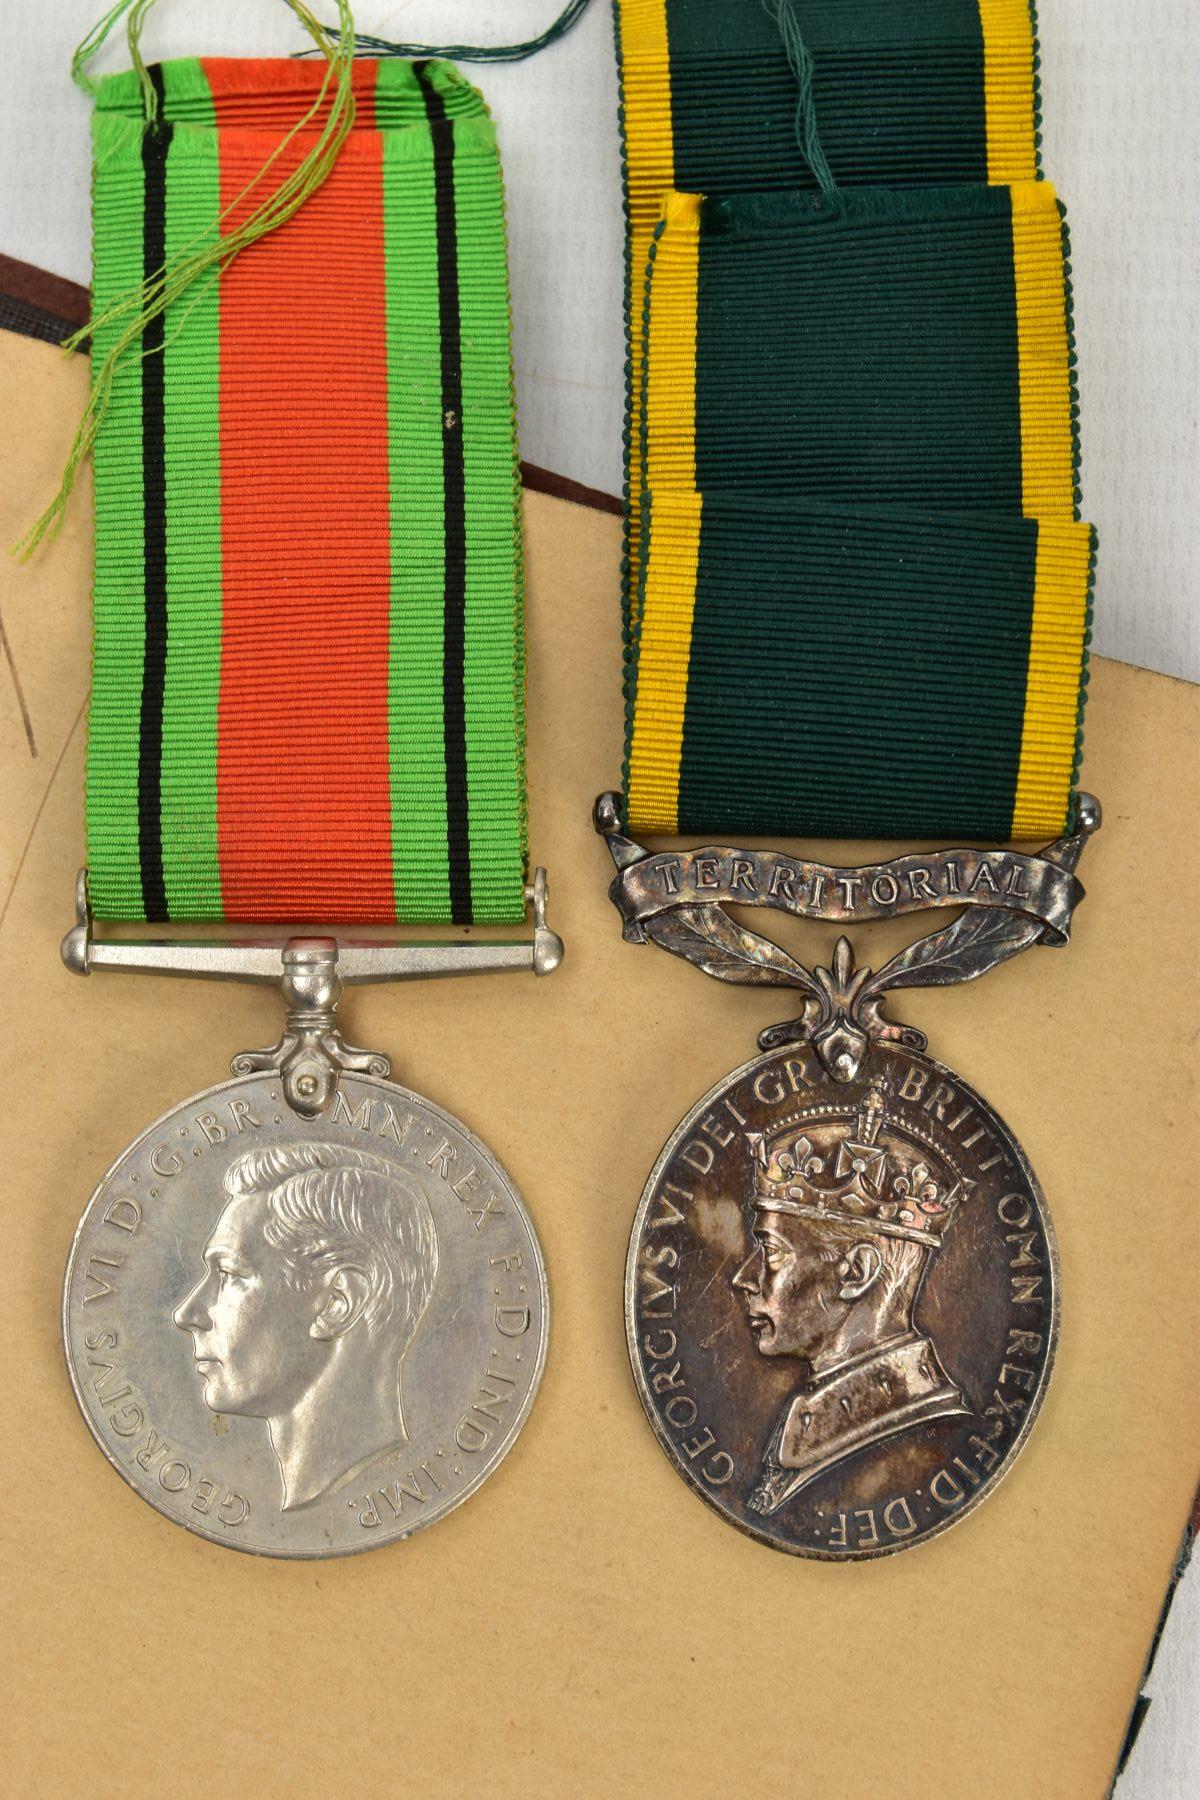 A WW2 TERRITORIAL EFFICIENCY GROUP OF FIVE MEDALS, attributed to CPL Norman Edward TRIPPASS R.E. - Image 2 of 7